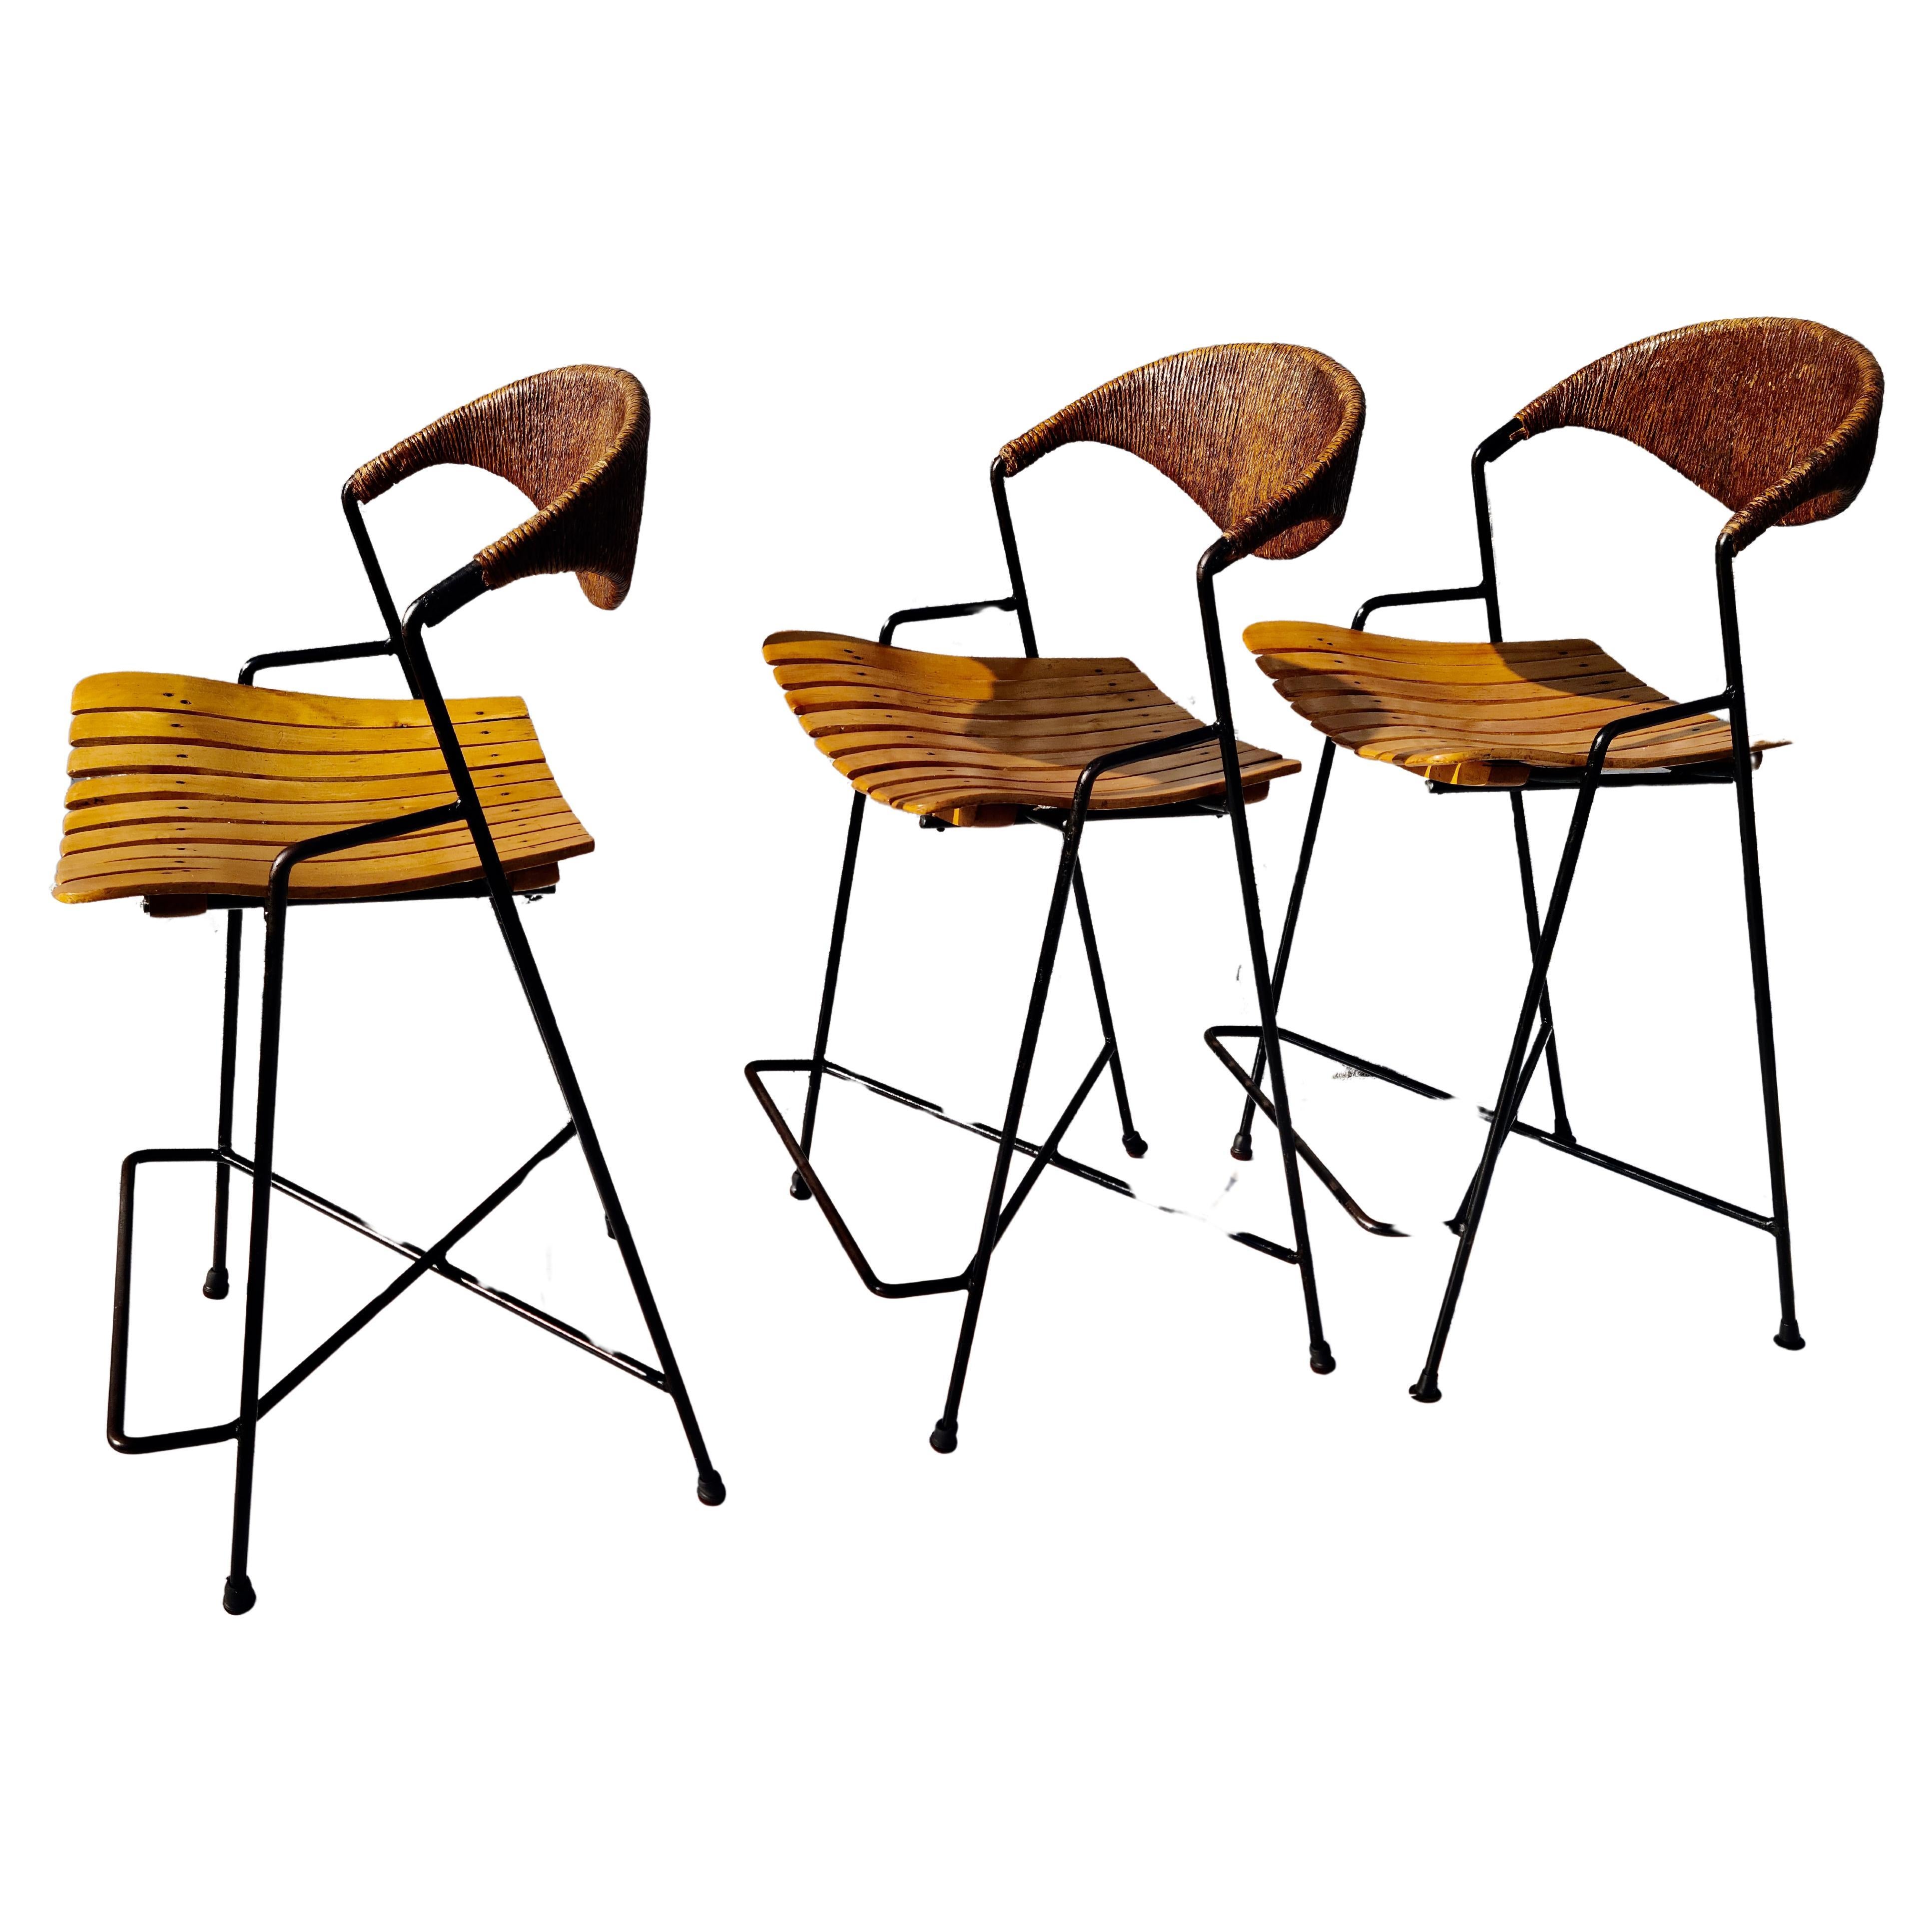 Mid-20th Century Set of 3 Barstools by Arthur Umanoff for Raymor For Sale